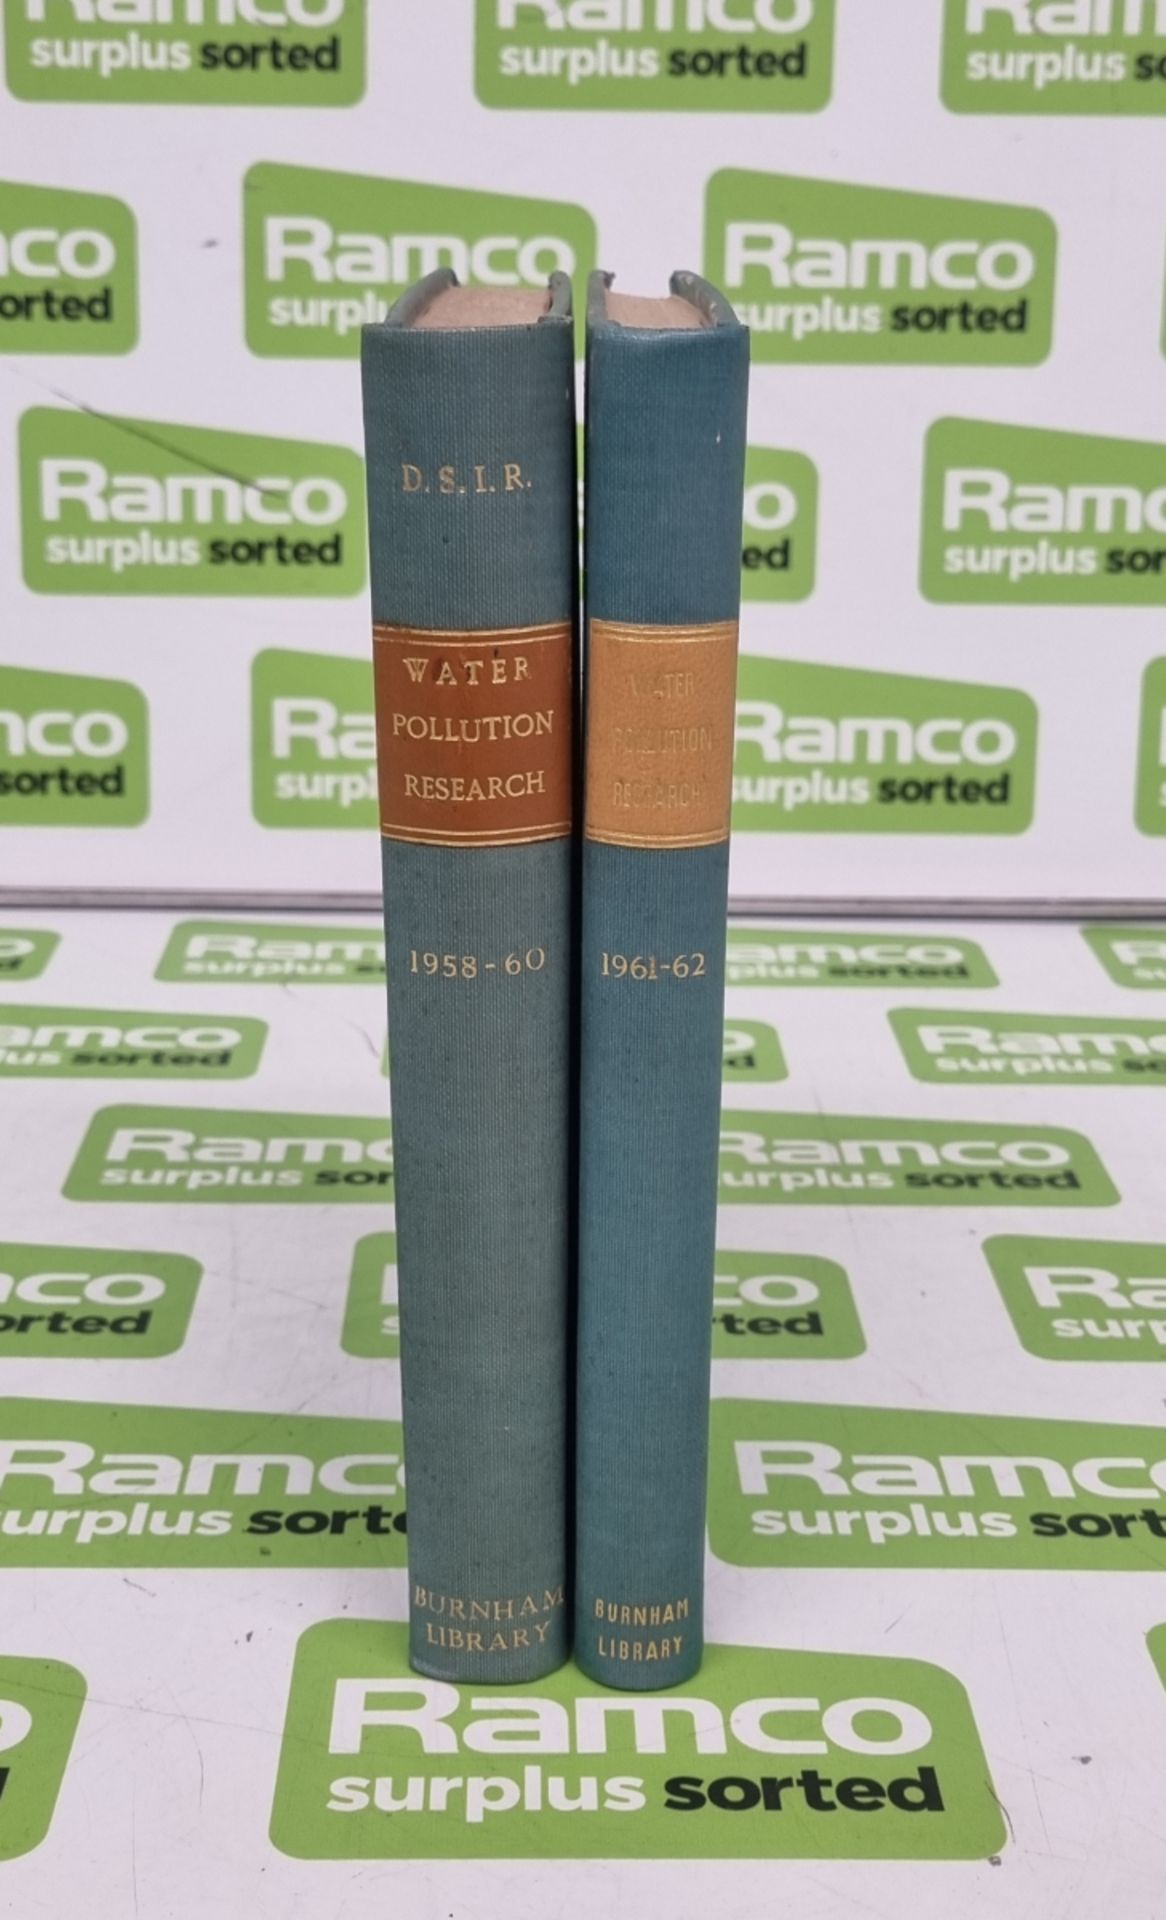 Department of Scientific and Industrial Research Water Pollution Research books - Volumes 1958-60 an